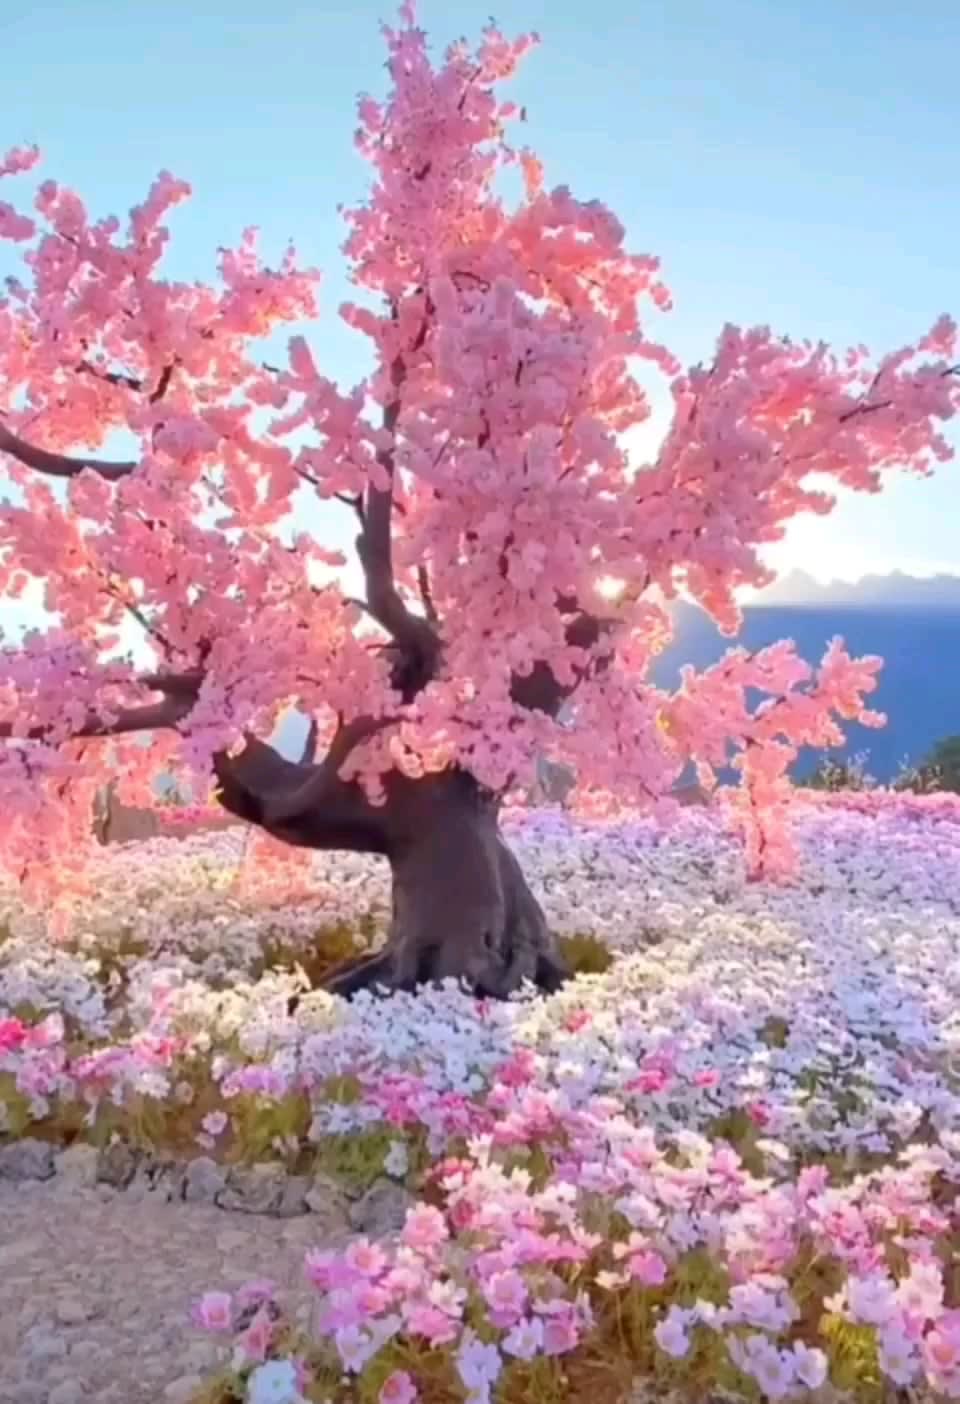 This field of pink flowers